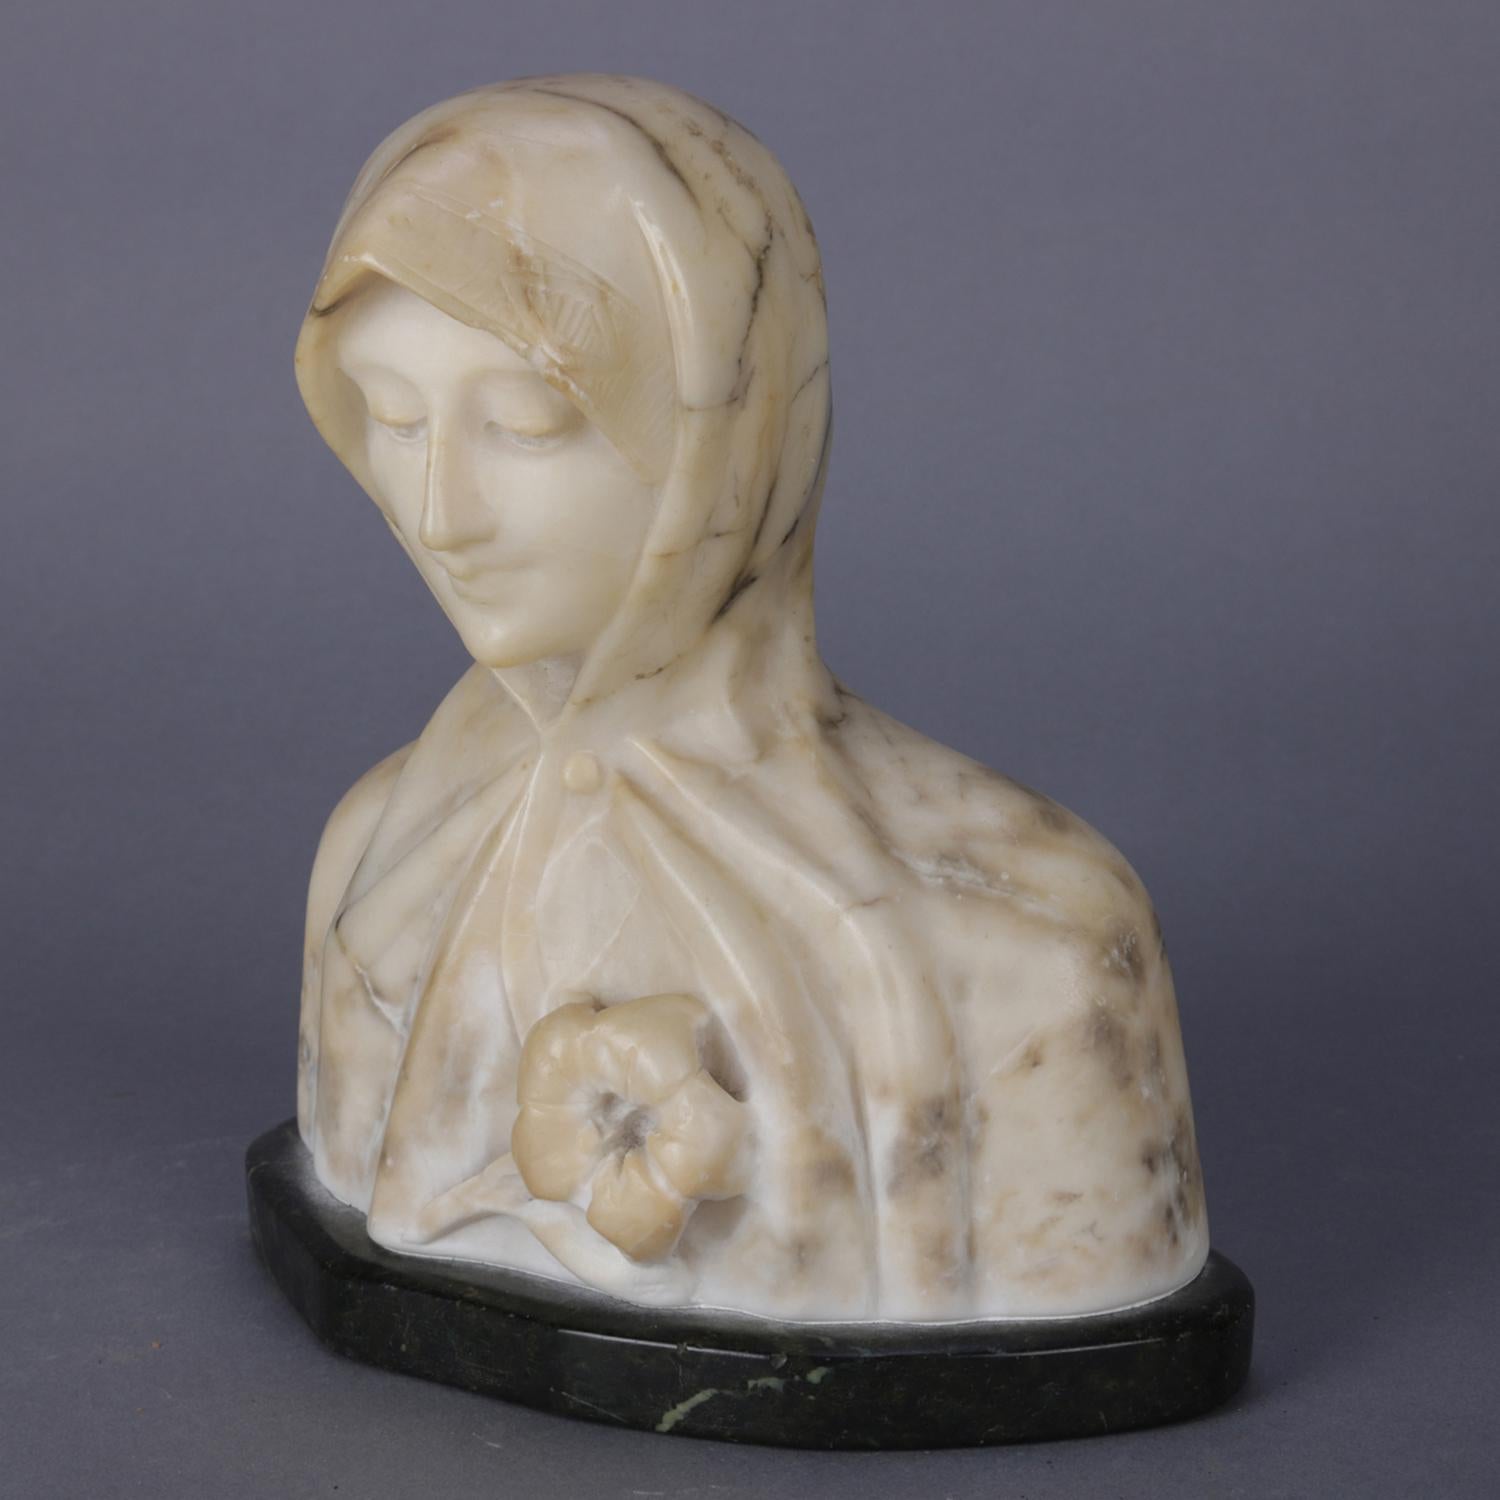 An antique Italian carved marble portrait bust sculpture depicts Mary, Mother of Jesus Christ, marble with deeply contrasting veining, circa 1900

Measures: 8.25